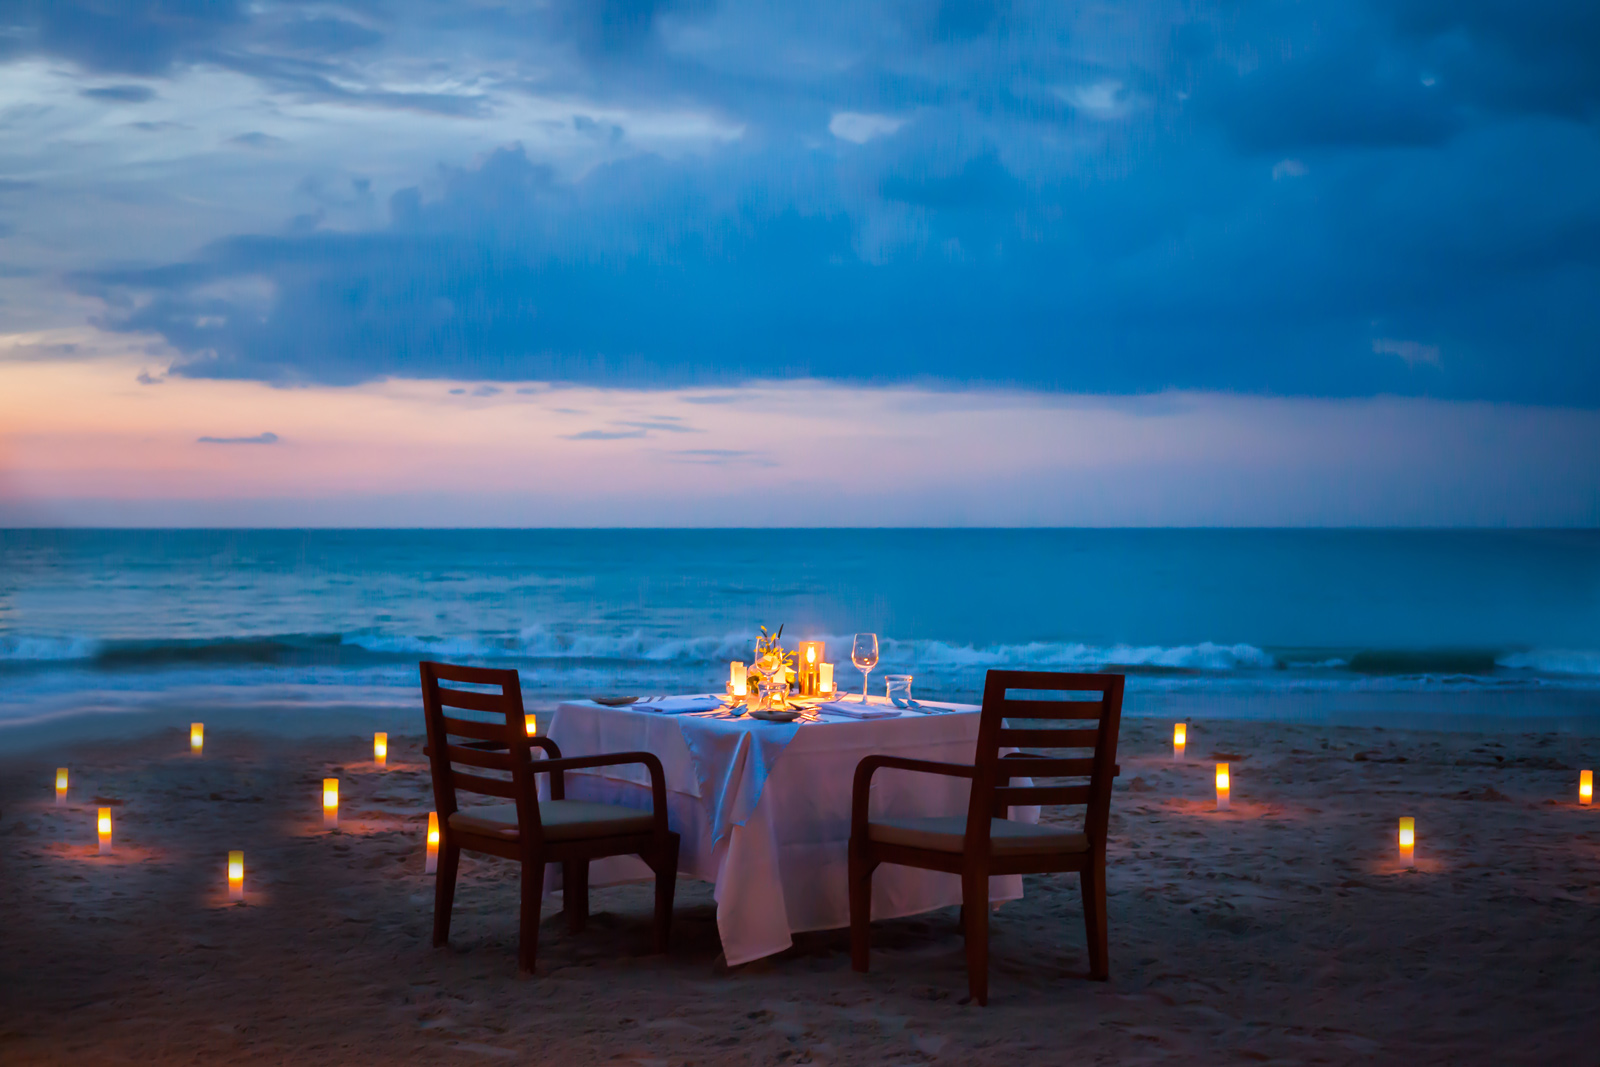 Décor tips to keep in mind when planning a romantic alfresco setting - Beautiful Homes